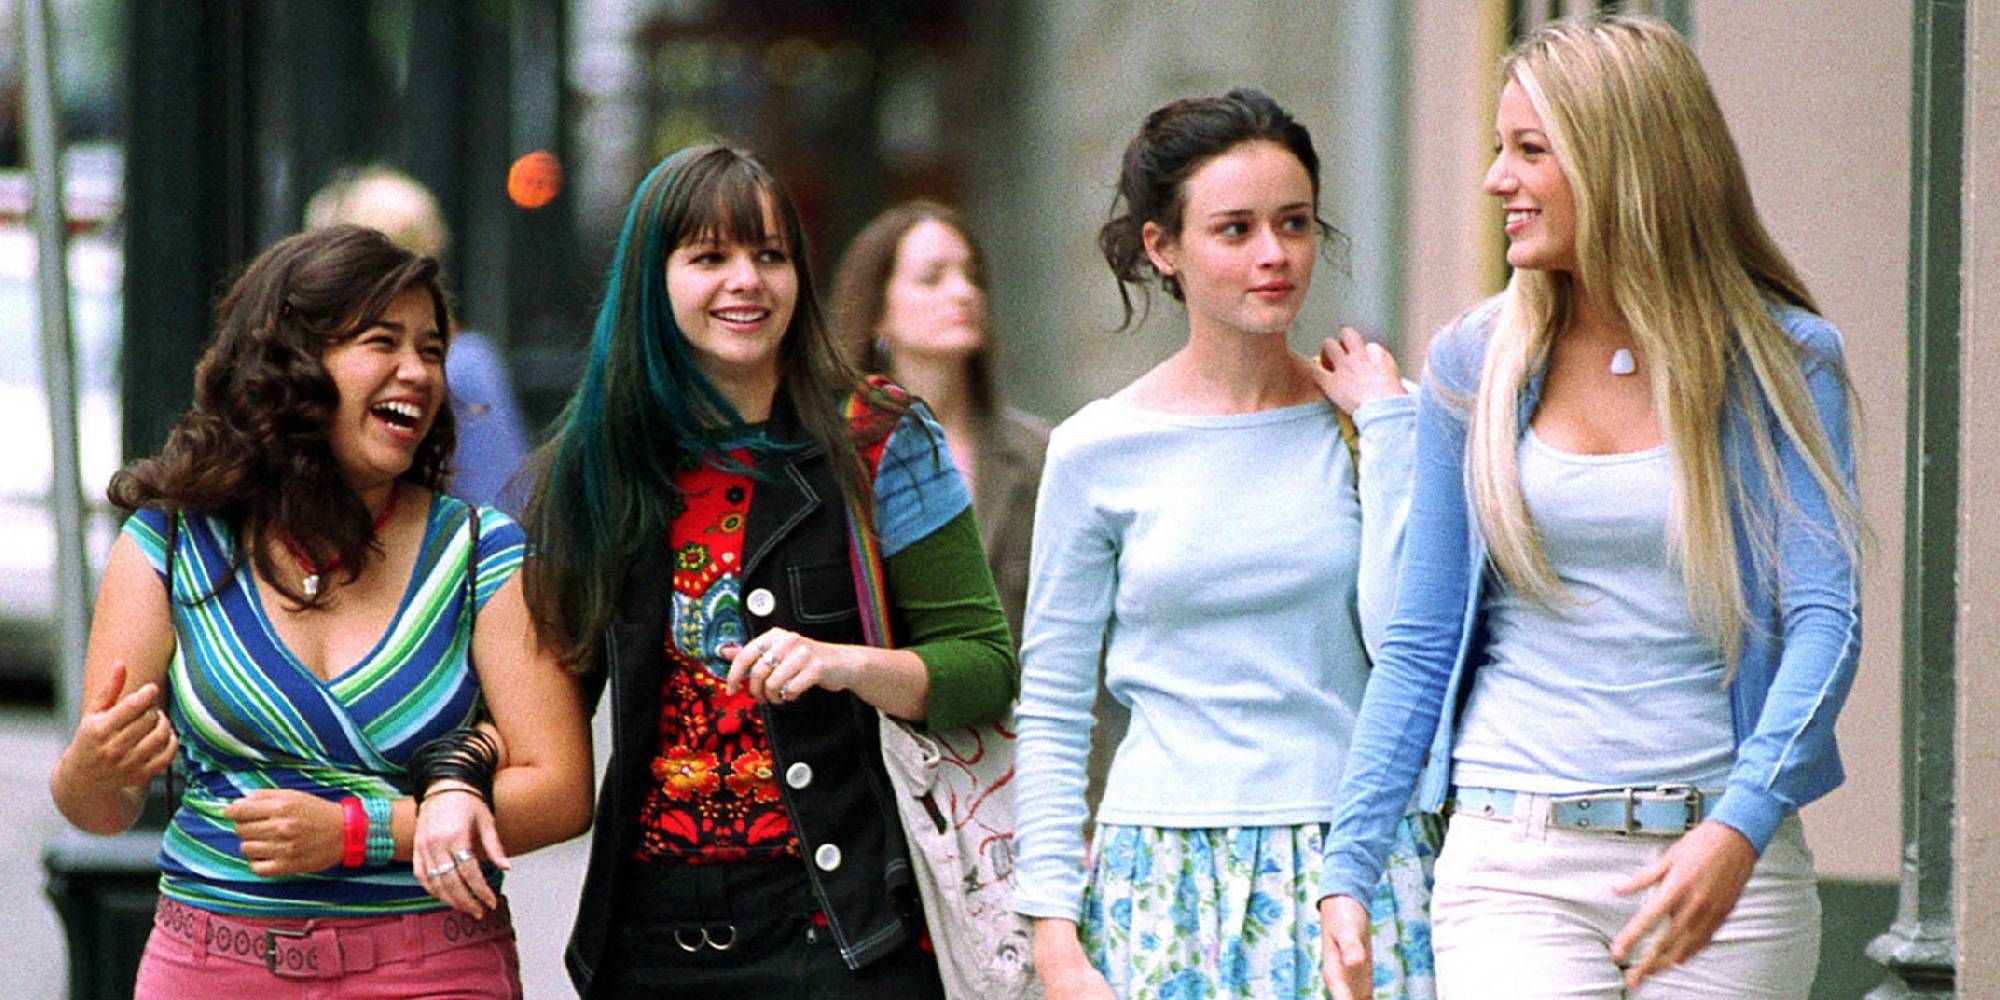 Four best friends walking together and smiling in The Sisterhood of the Traveling Pants